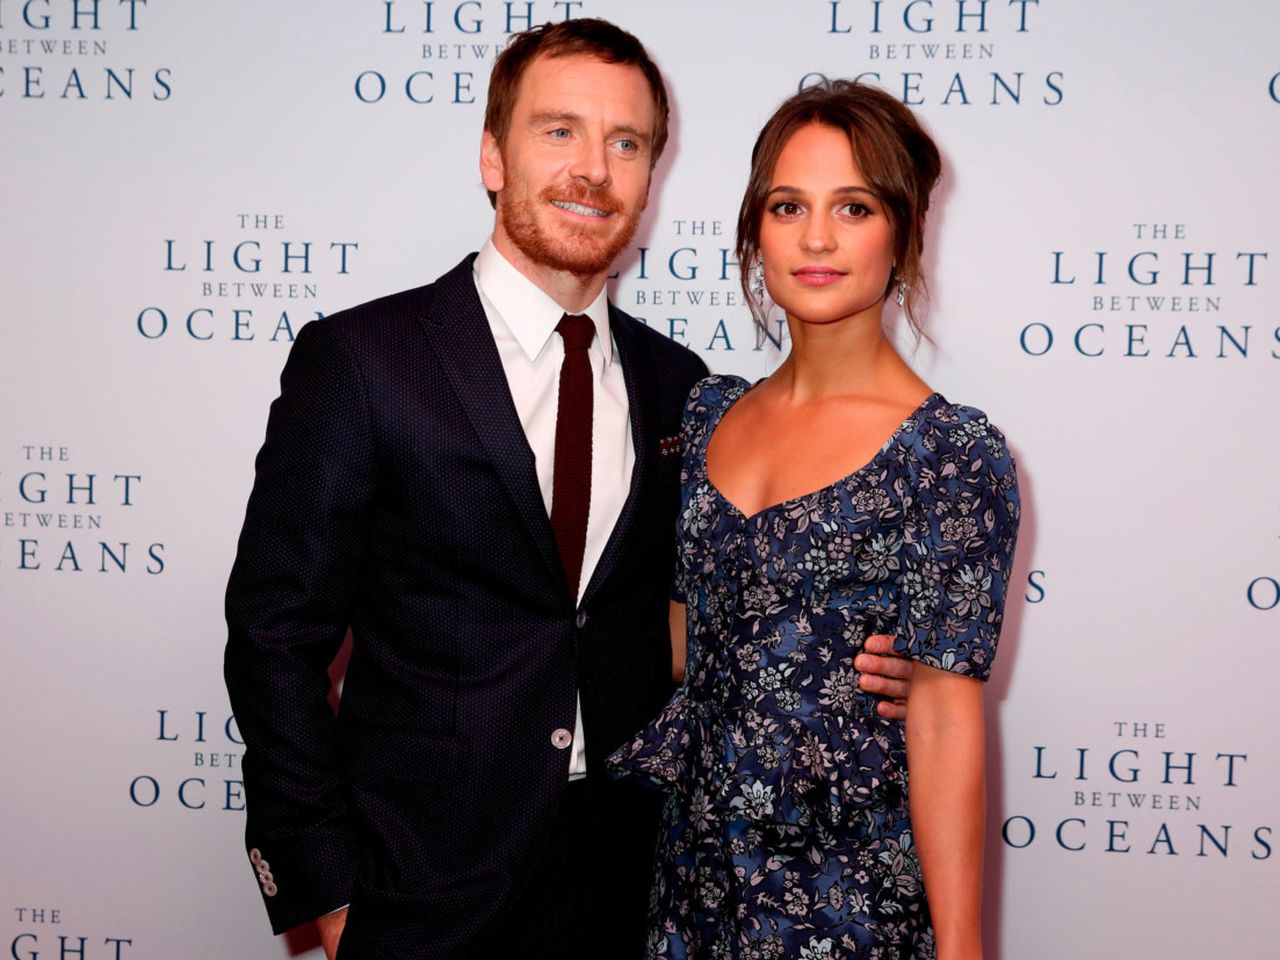 Michael Fassbender and Alicia Vikander starring together since